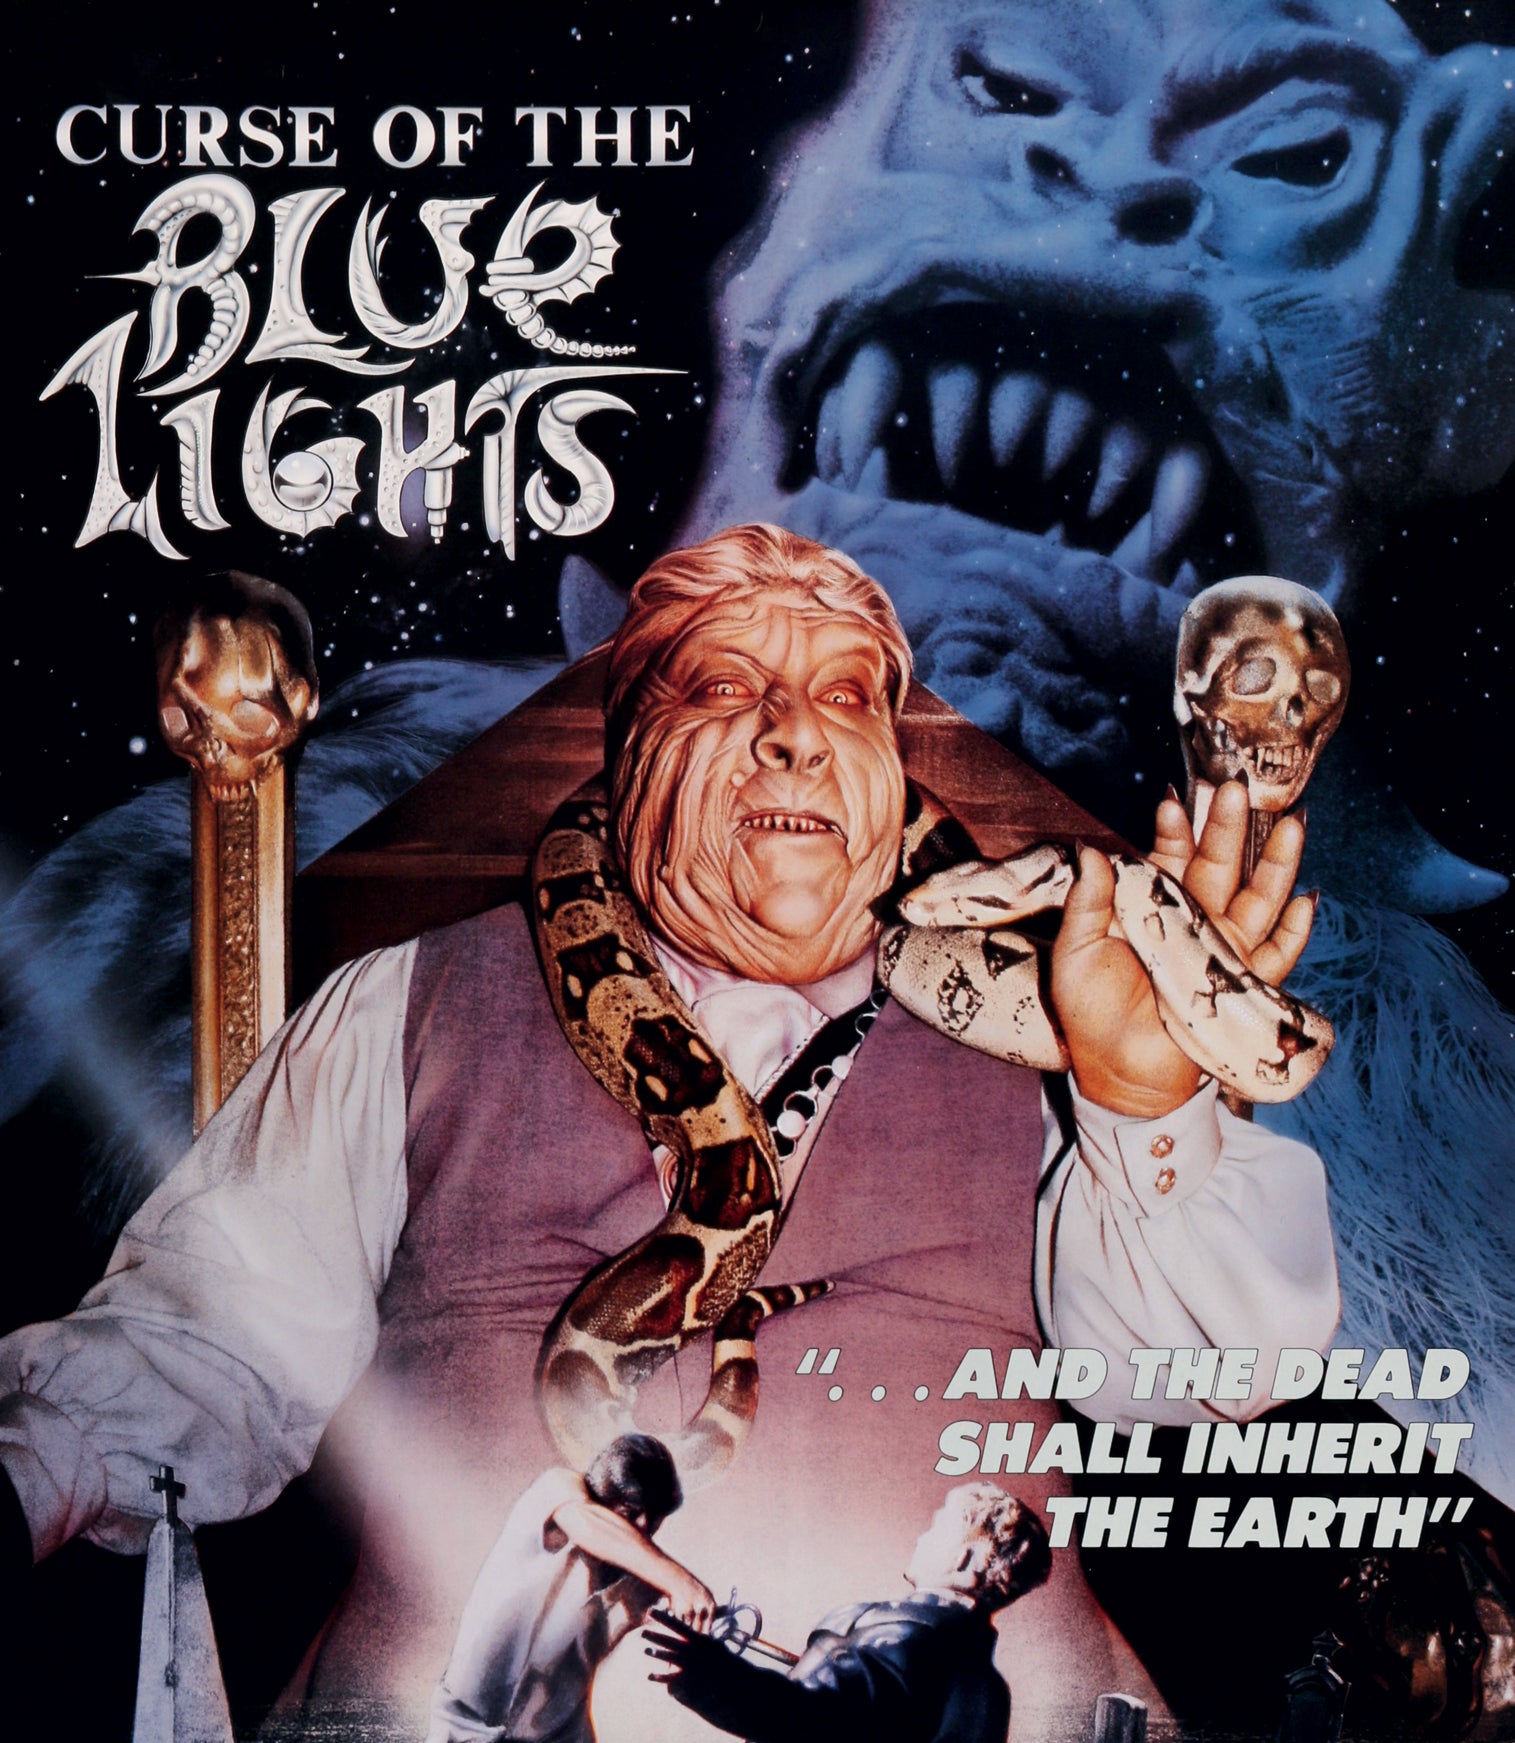 CURSE OF THE BLUE LIGHTS (LIMITED EDITION) BLU-RAY